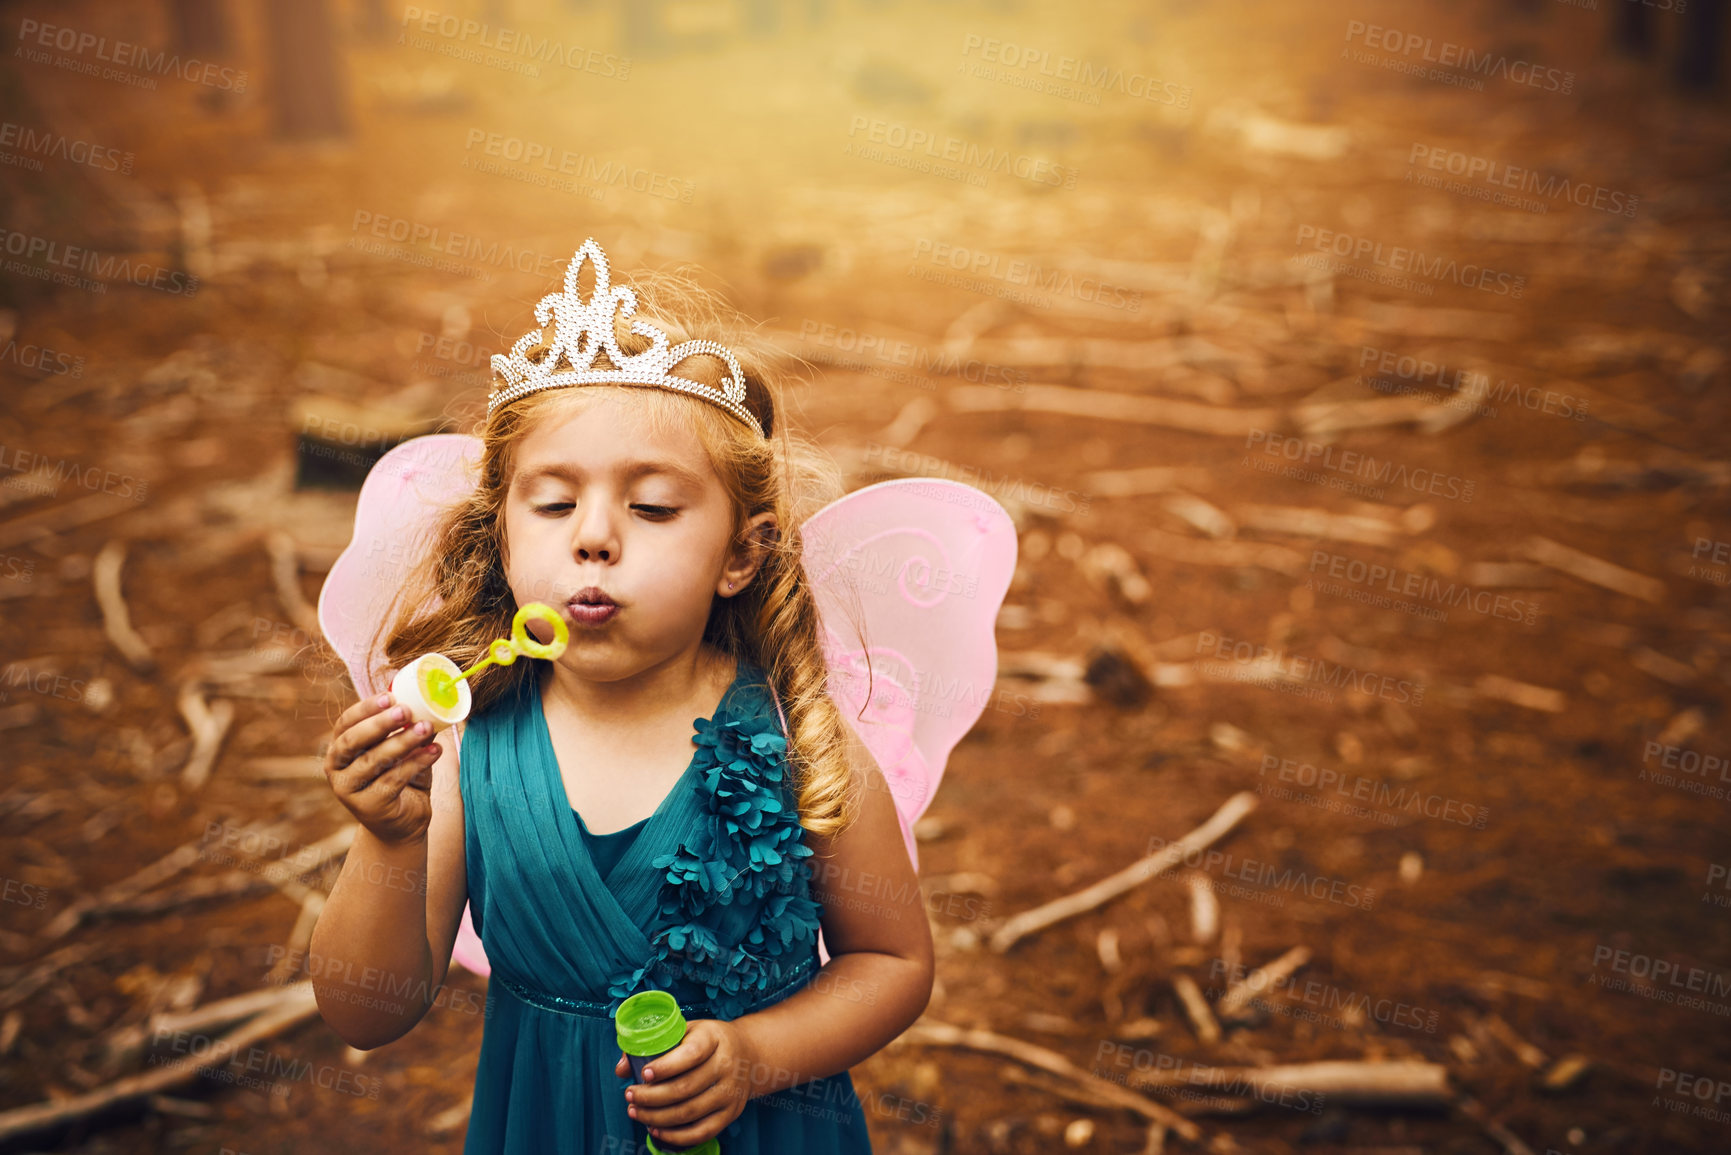 Buy stock photo Shot of a happy little girl blowing bubbles while standing outside in the woods